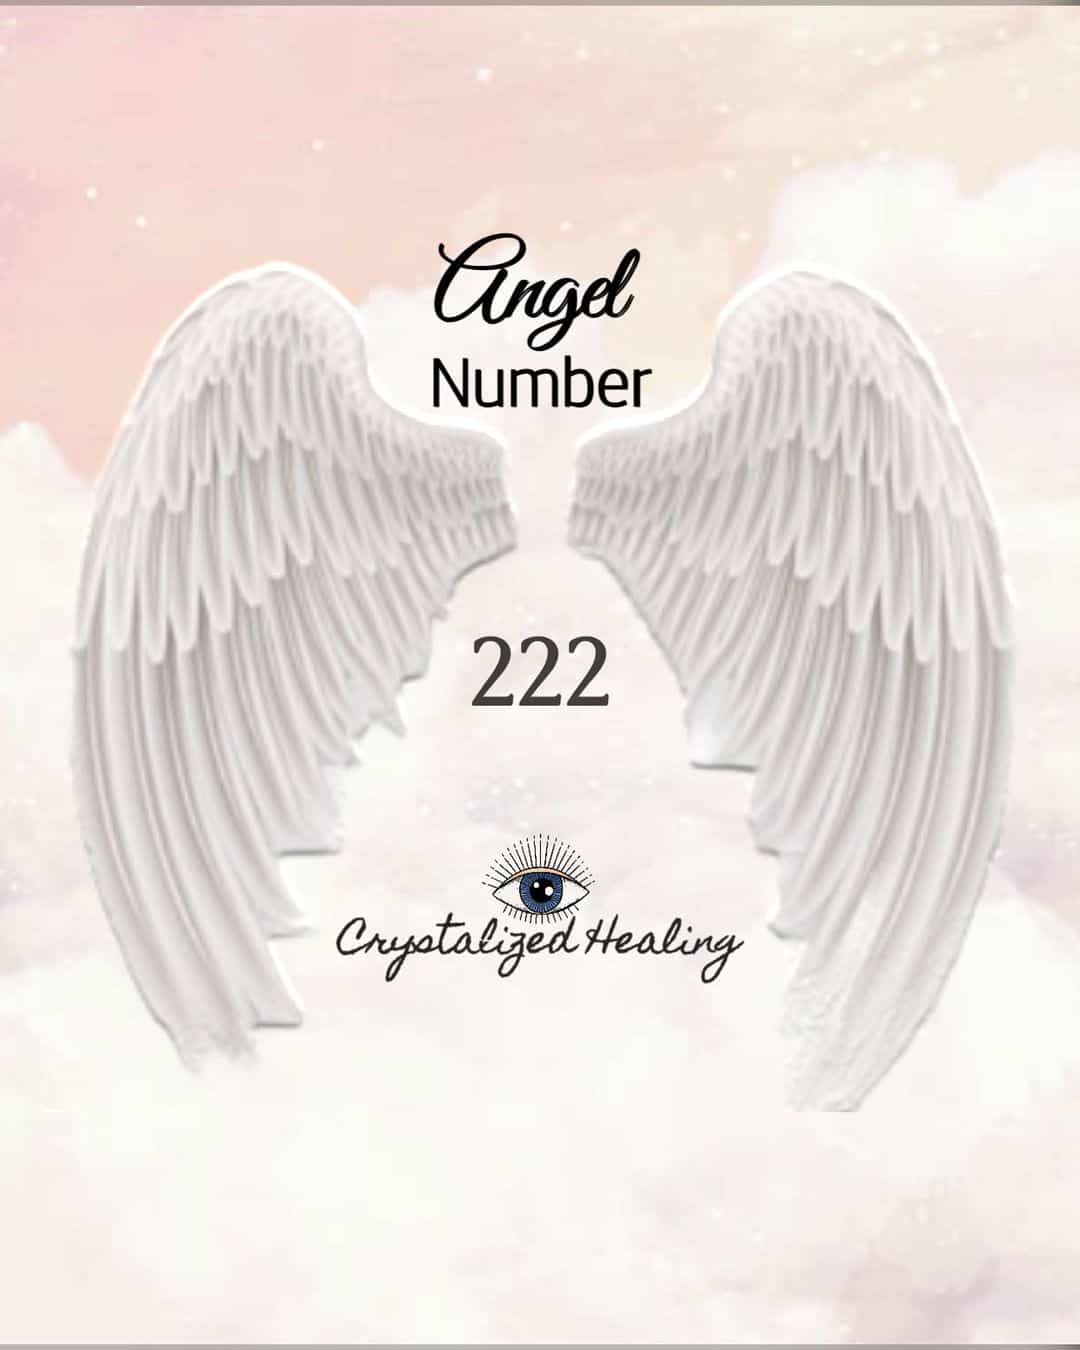 What Are My Guardian Angels Saying When I See the 222 Angel Number